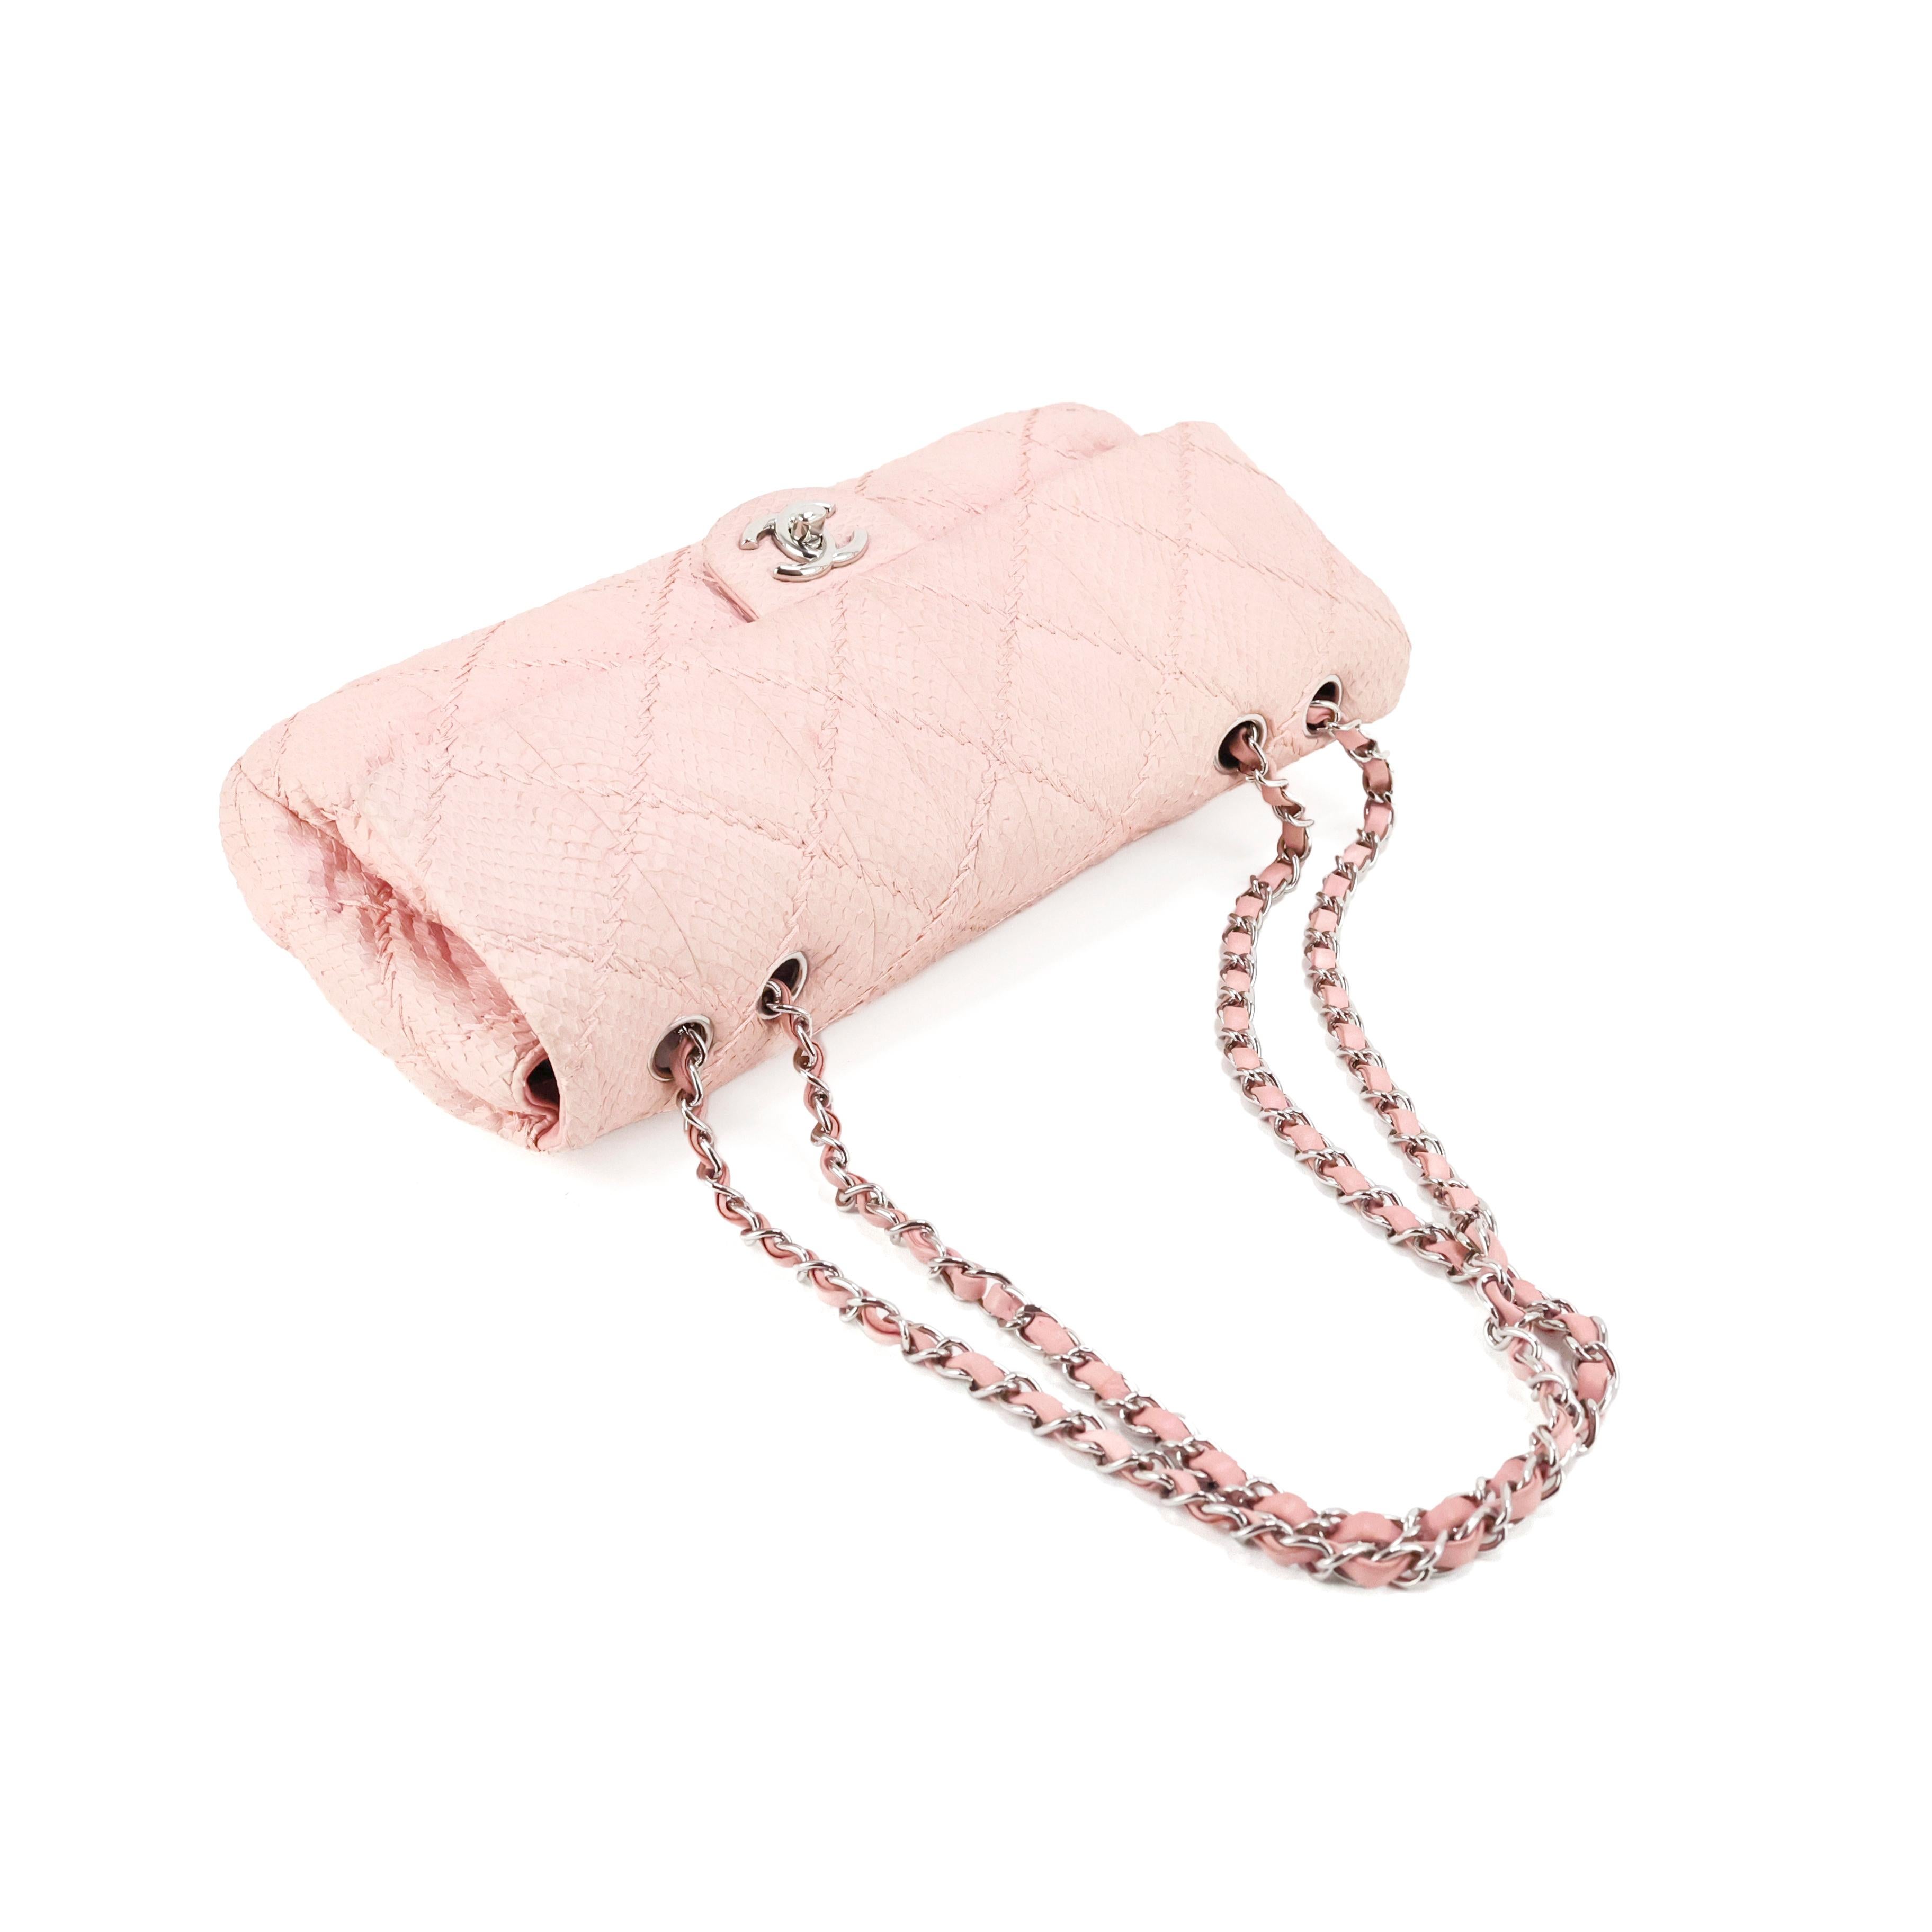 Chanel Classic Flap Bag in light pink Python leather For Sale 5